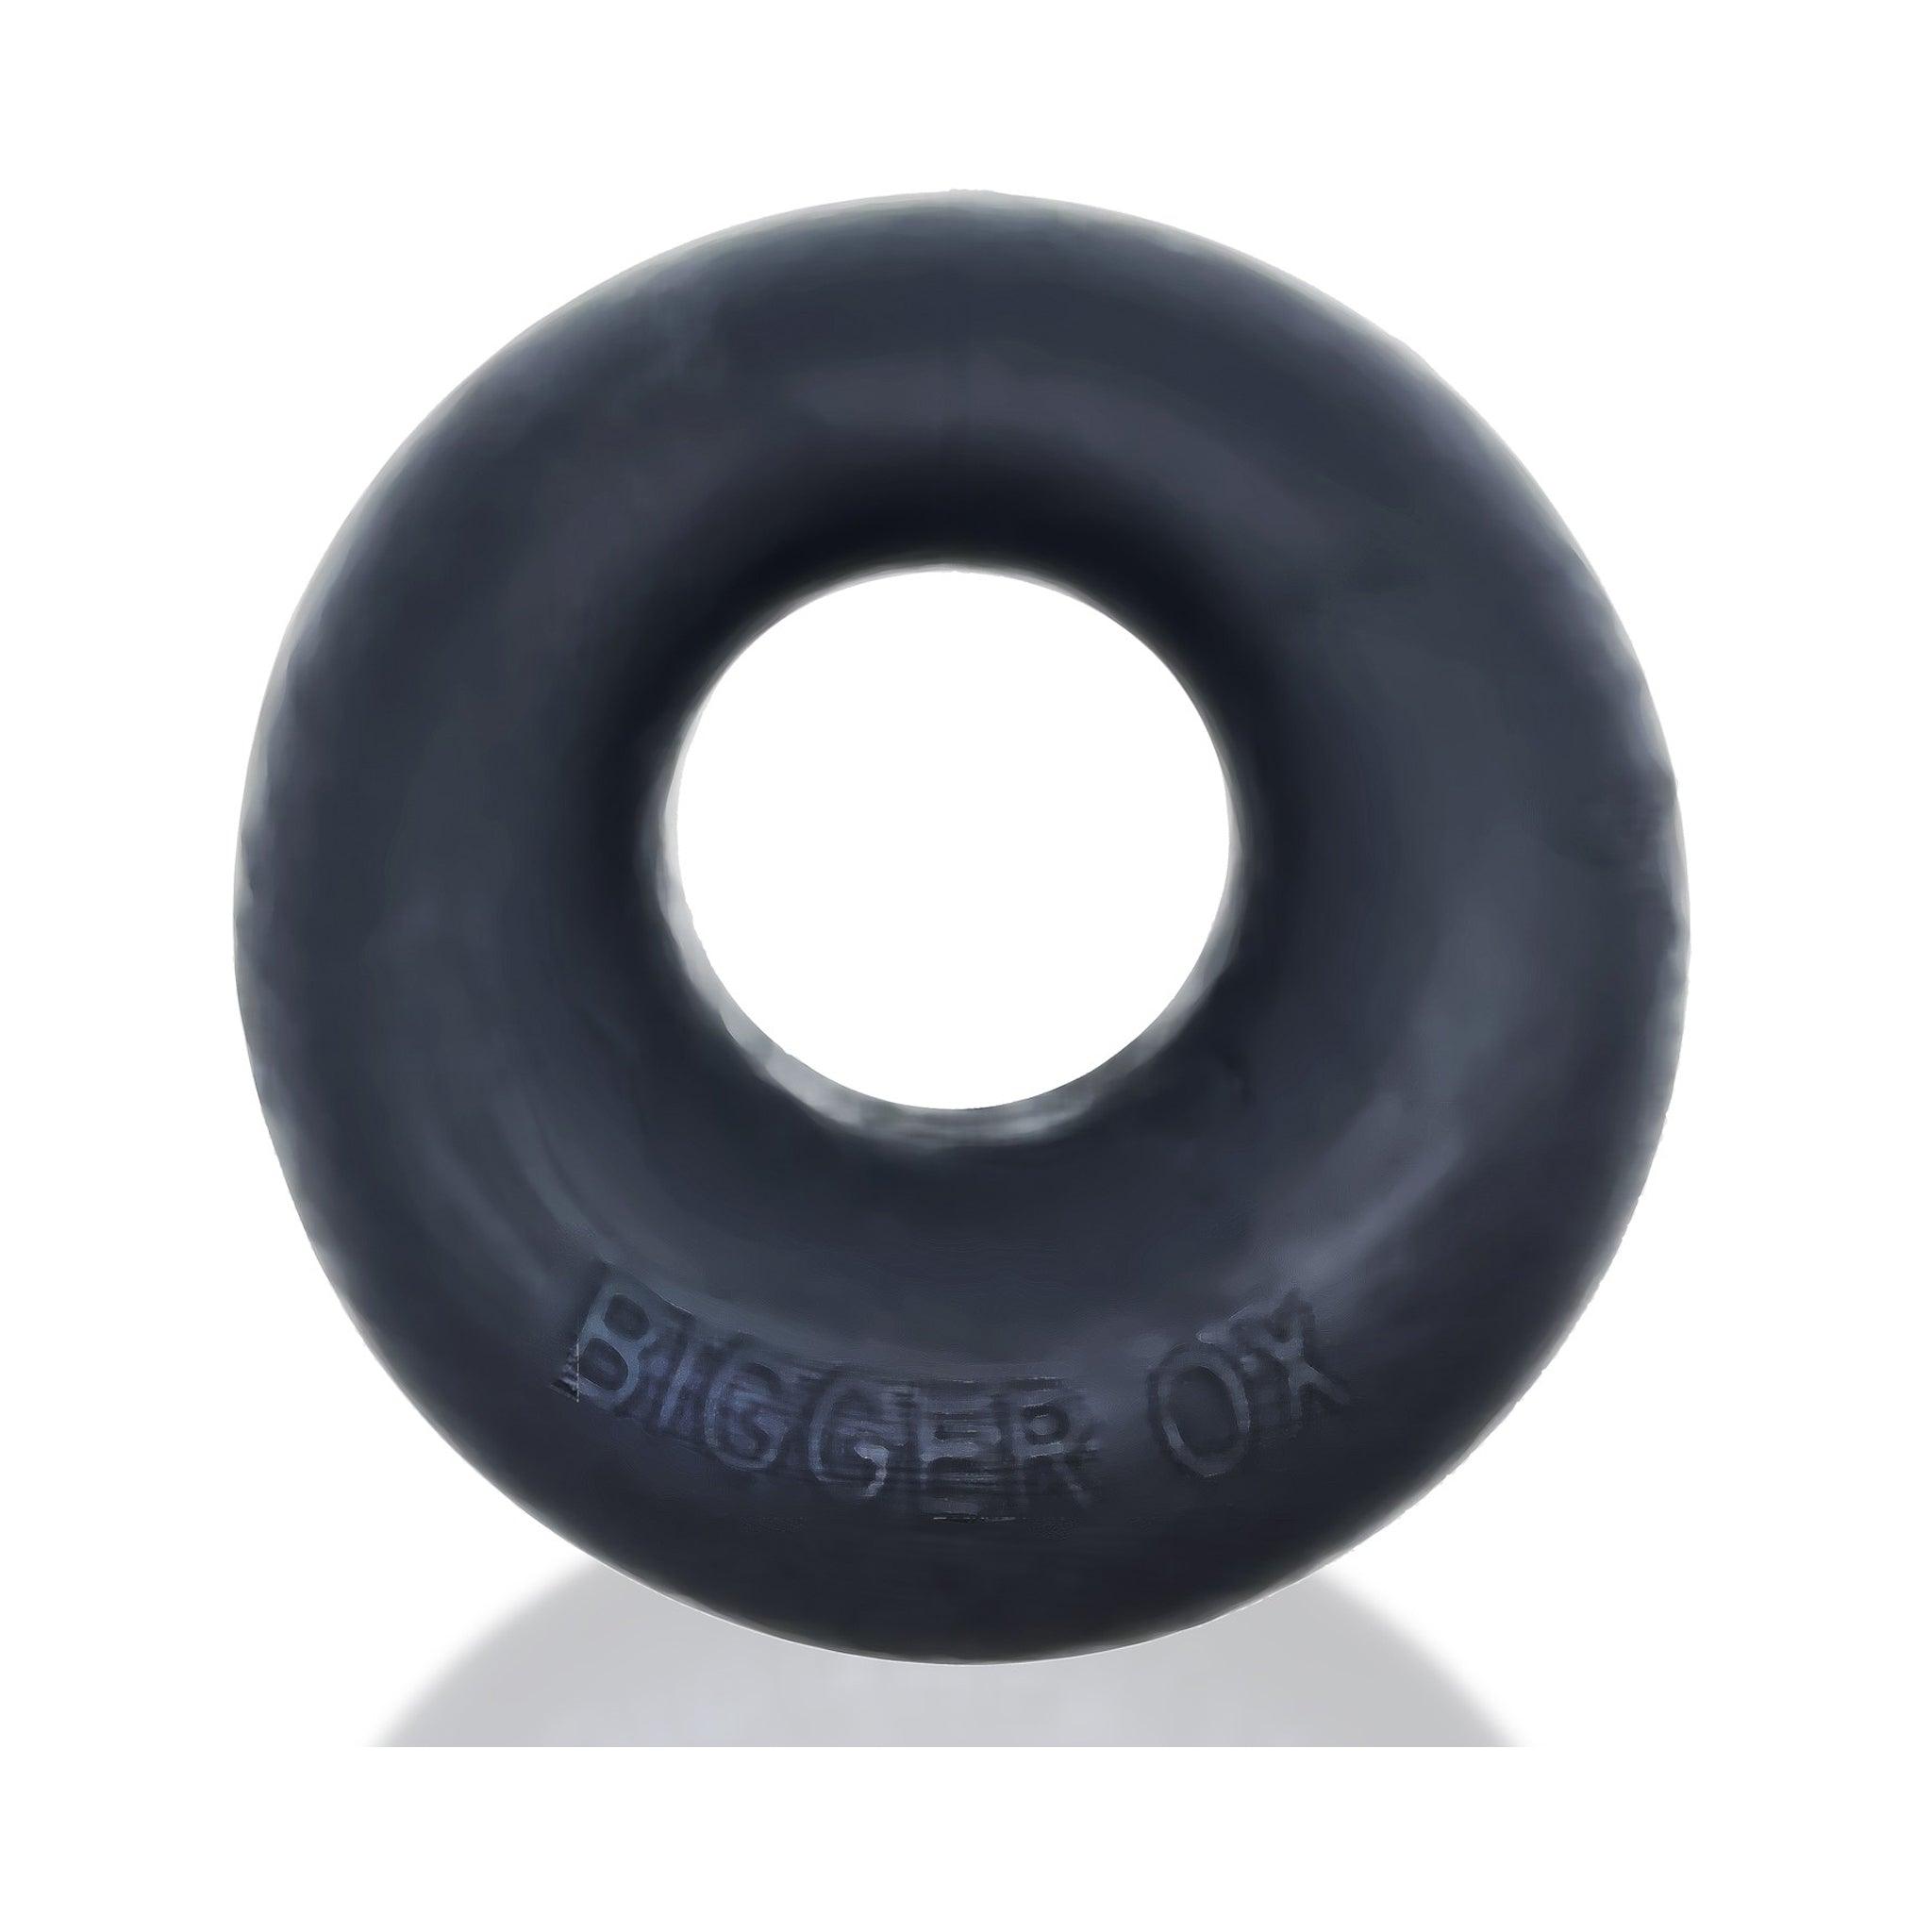 OxBalls Bigger OX Super Mega Stretch Ring - 2 Colors to Choose From - CheapLubes.com